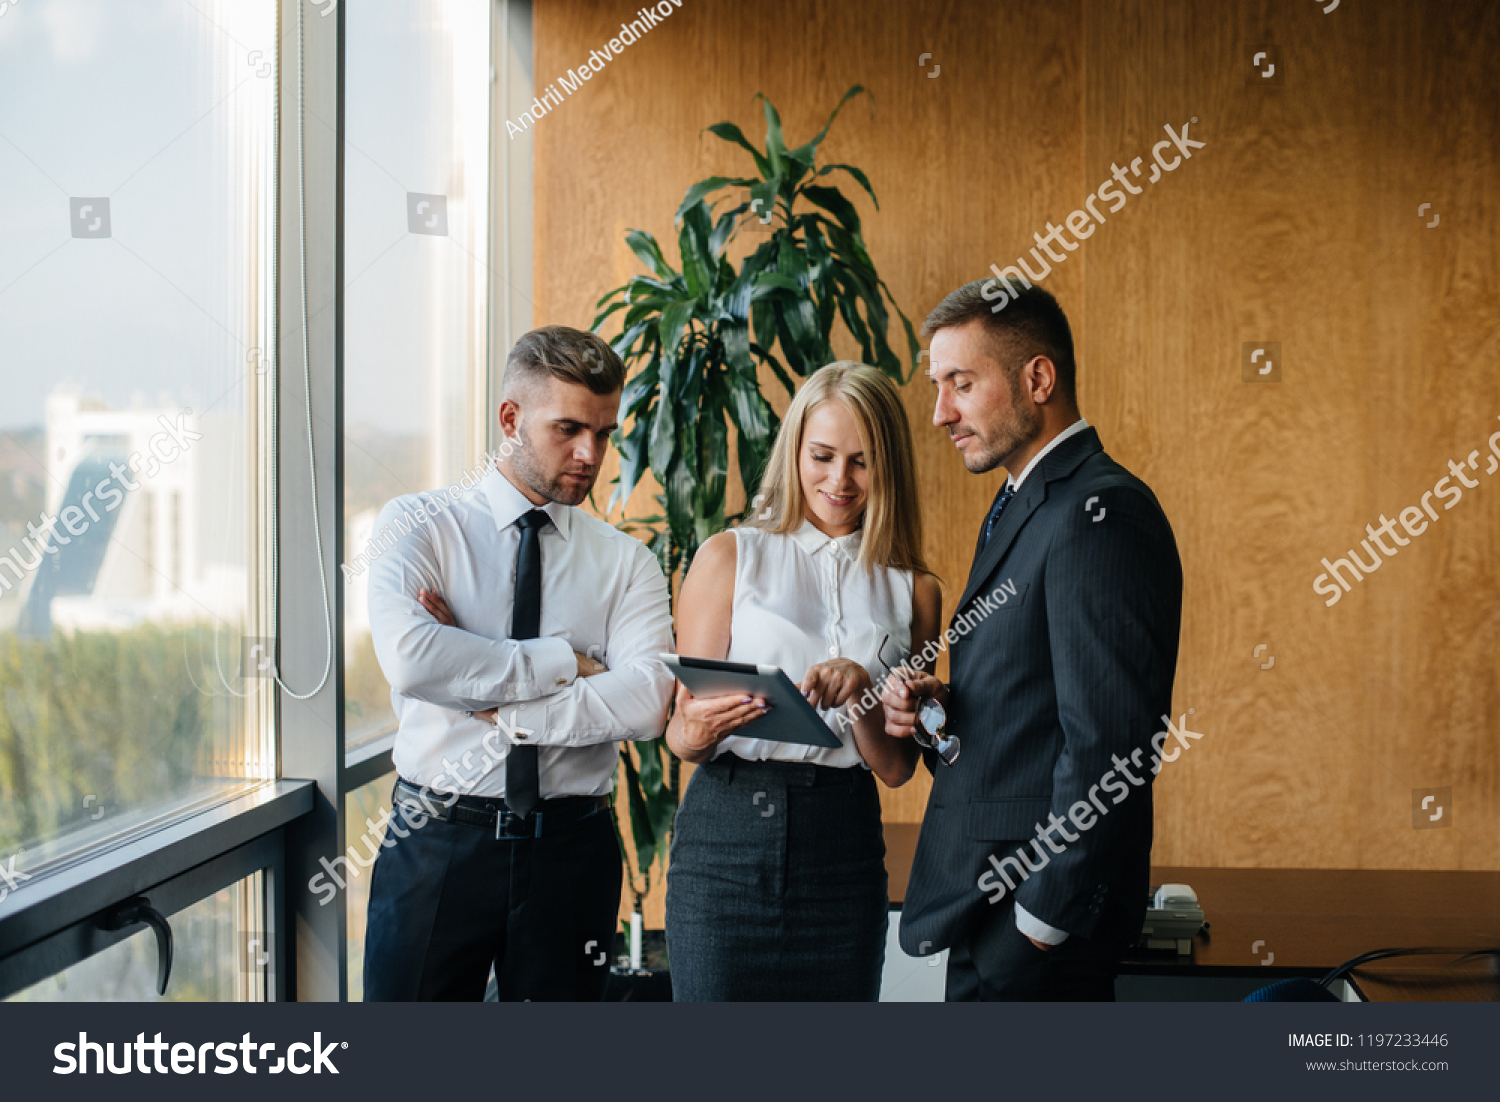 The employees of the firm are discussing the contract standing near the window. Business. Office. Finance. #1197233446